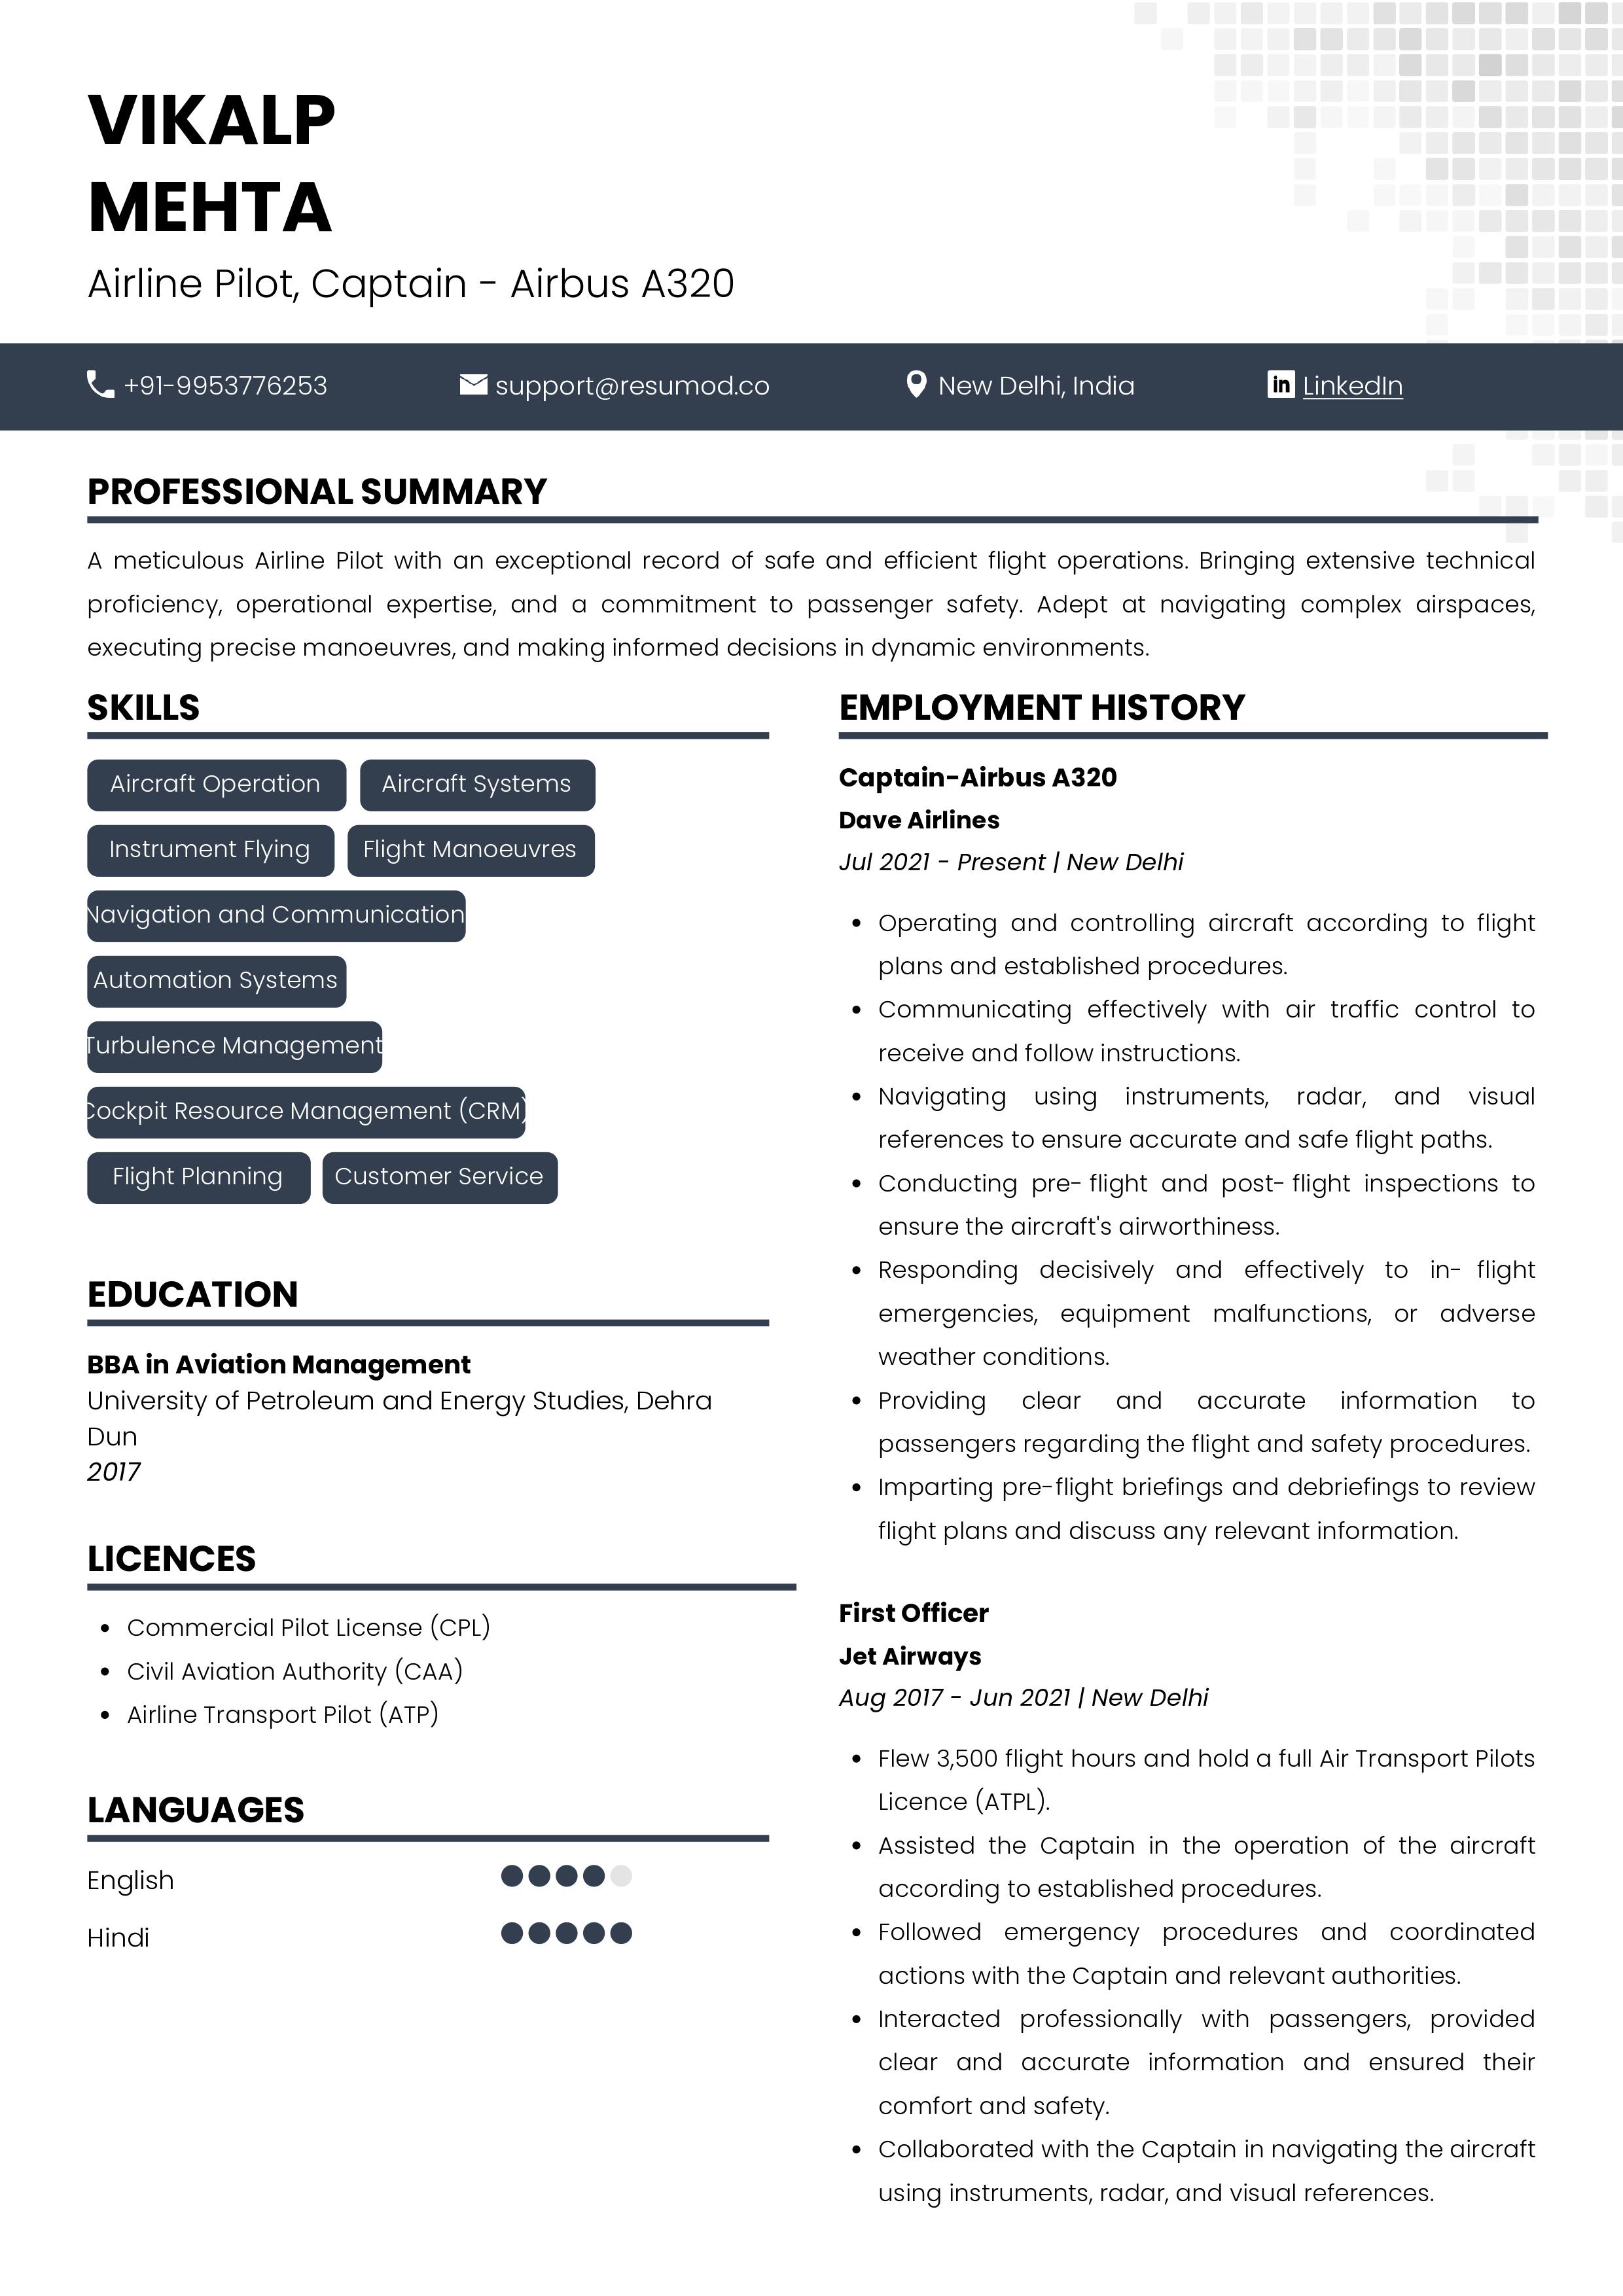 Sample Resume of Airline Pilot | Free Resume Templates & Samples on Resumod.co